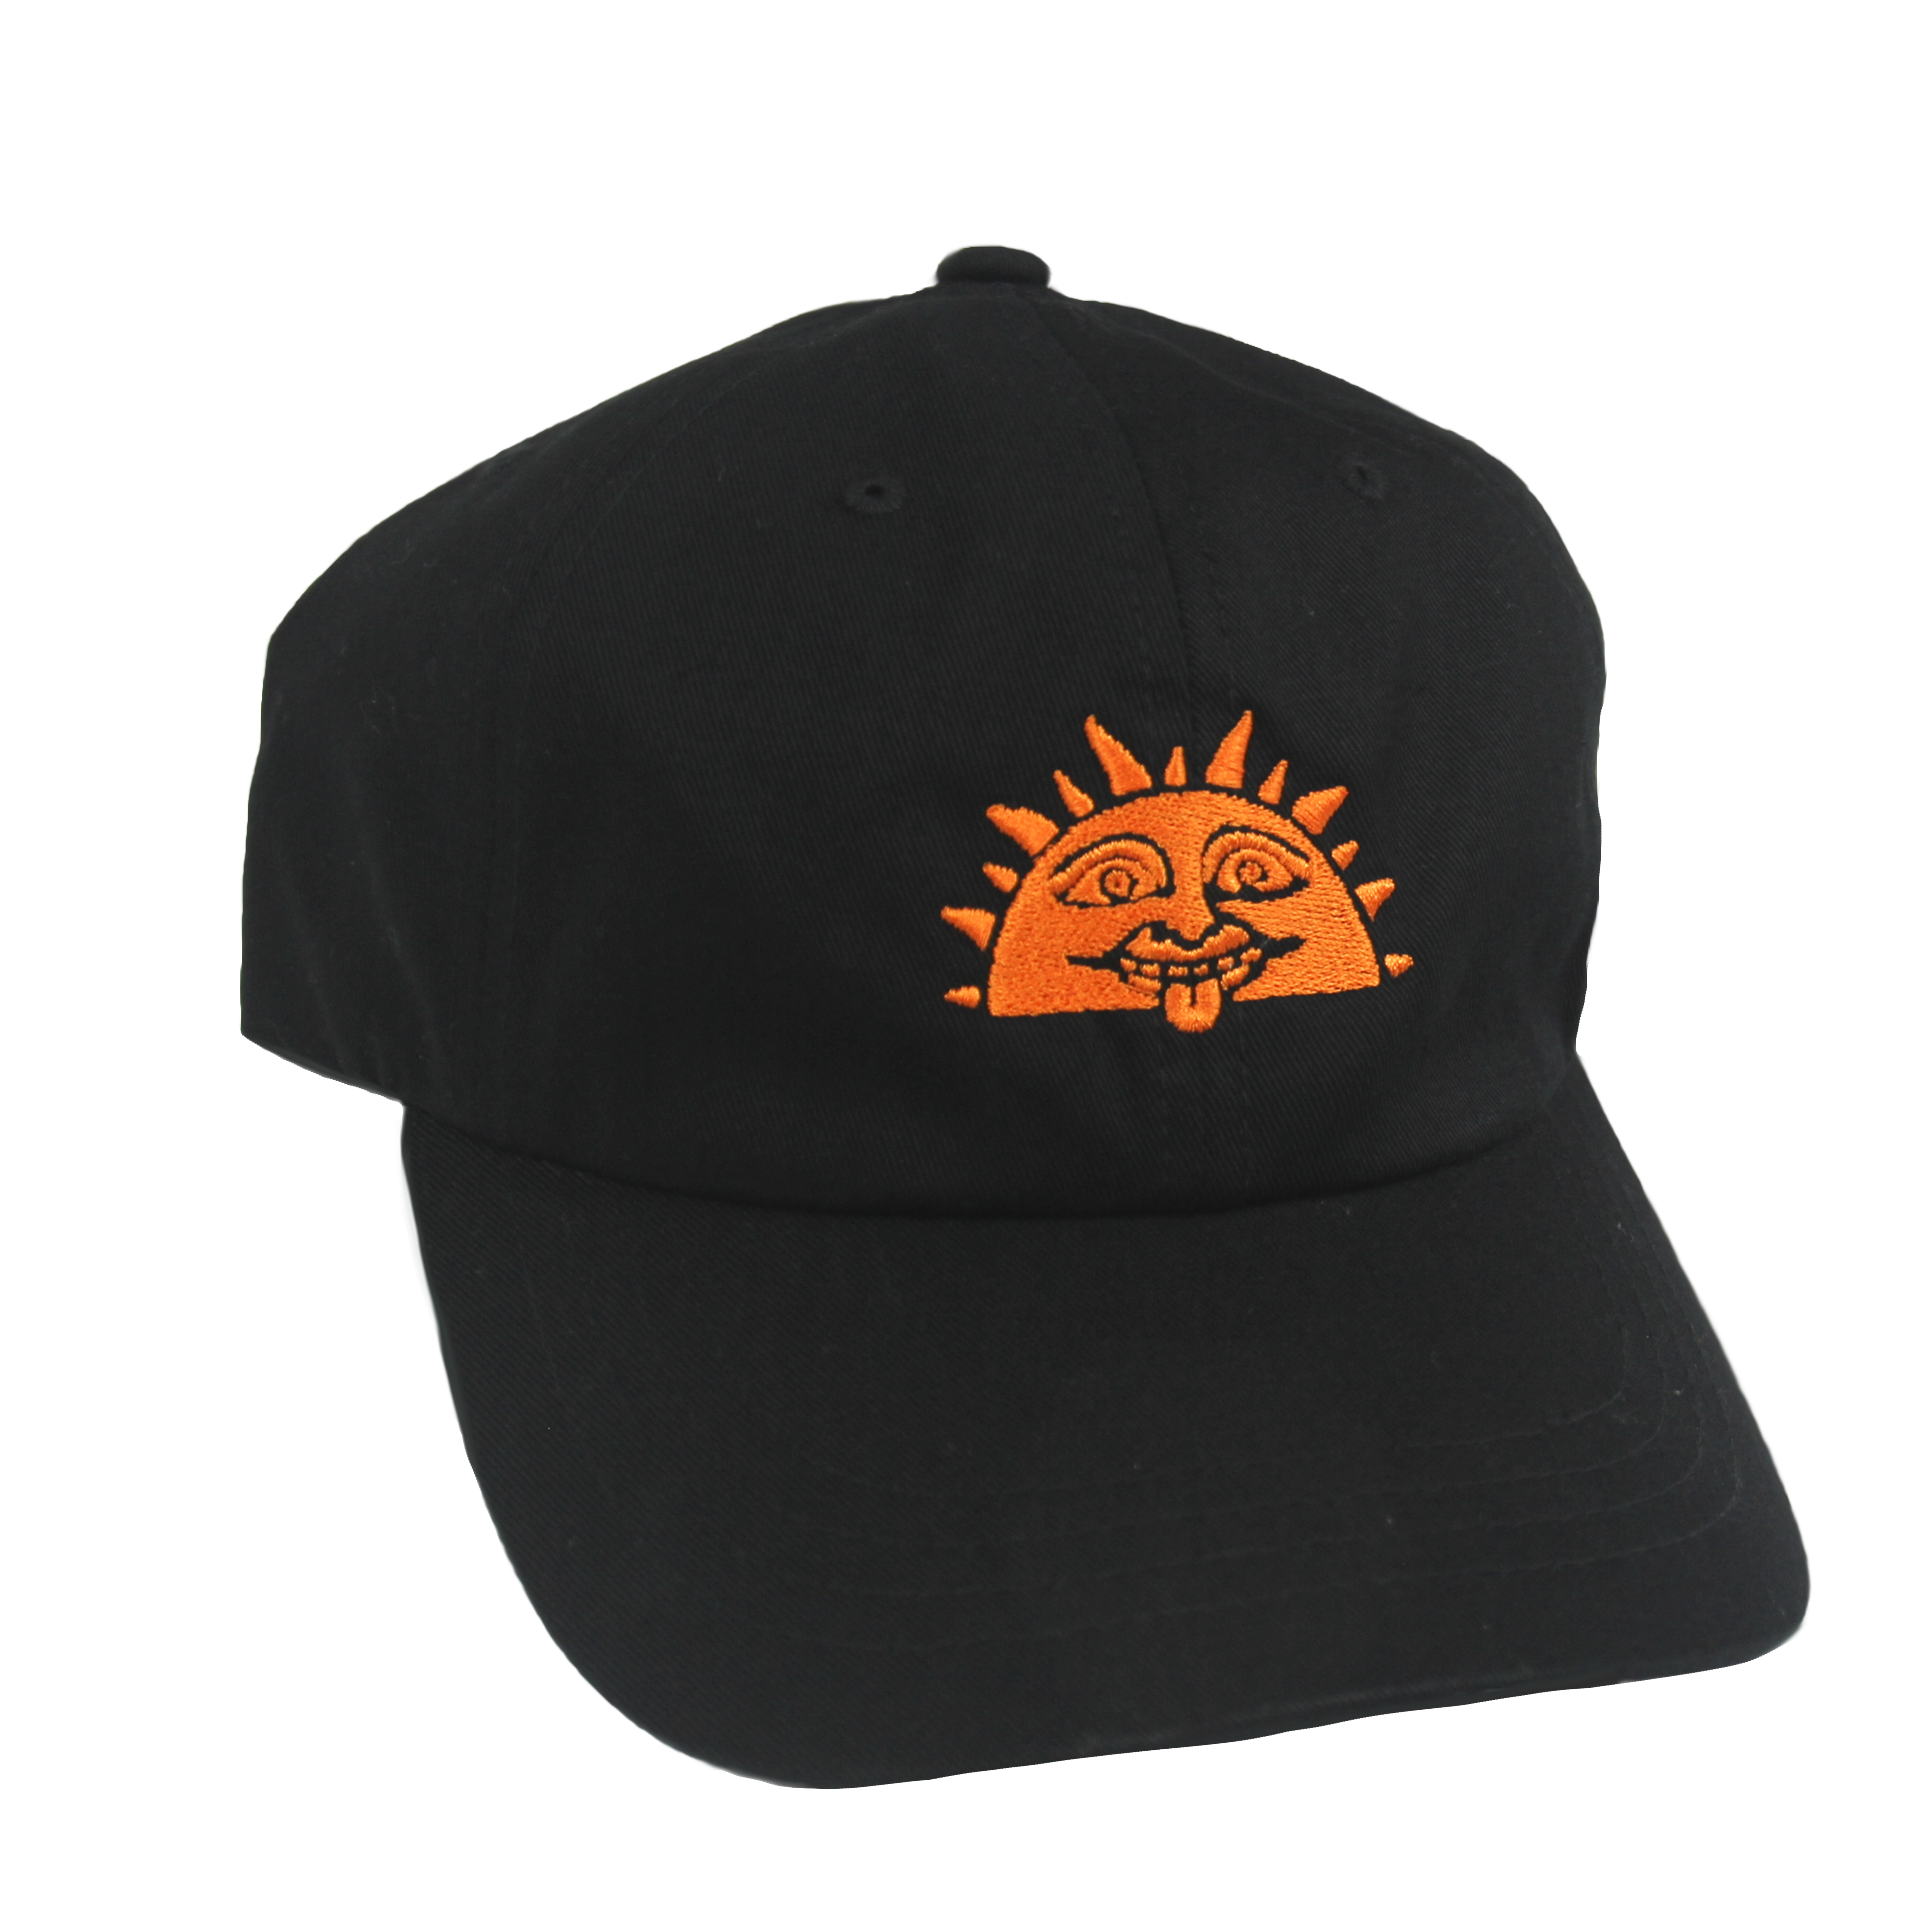 south forty brand hat